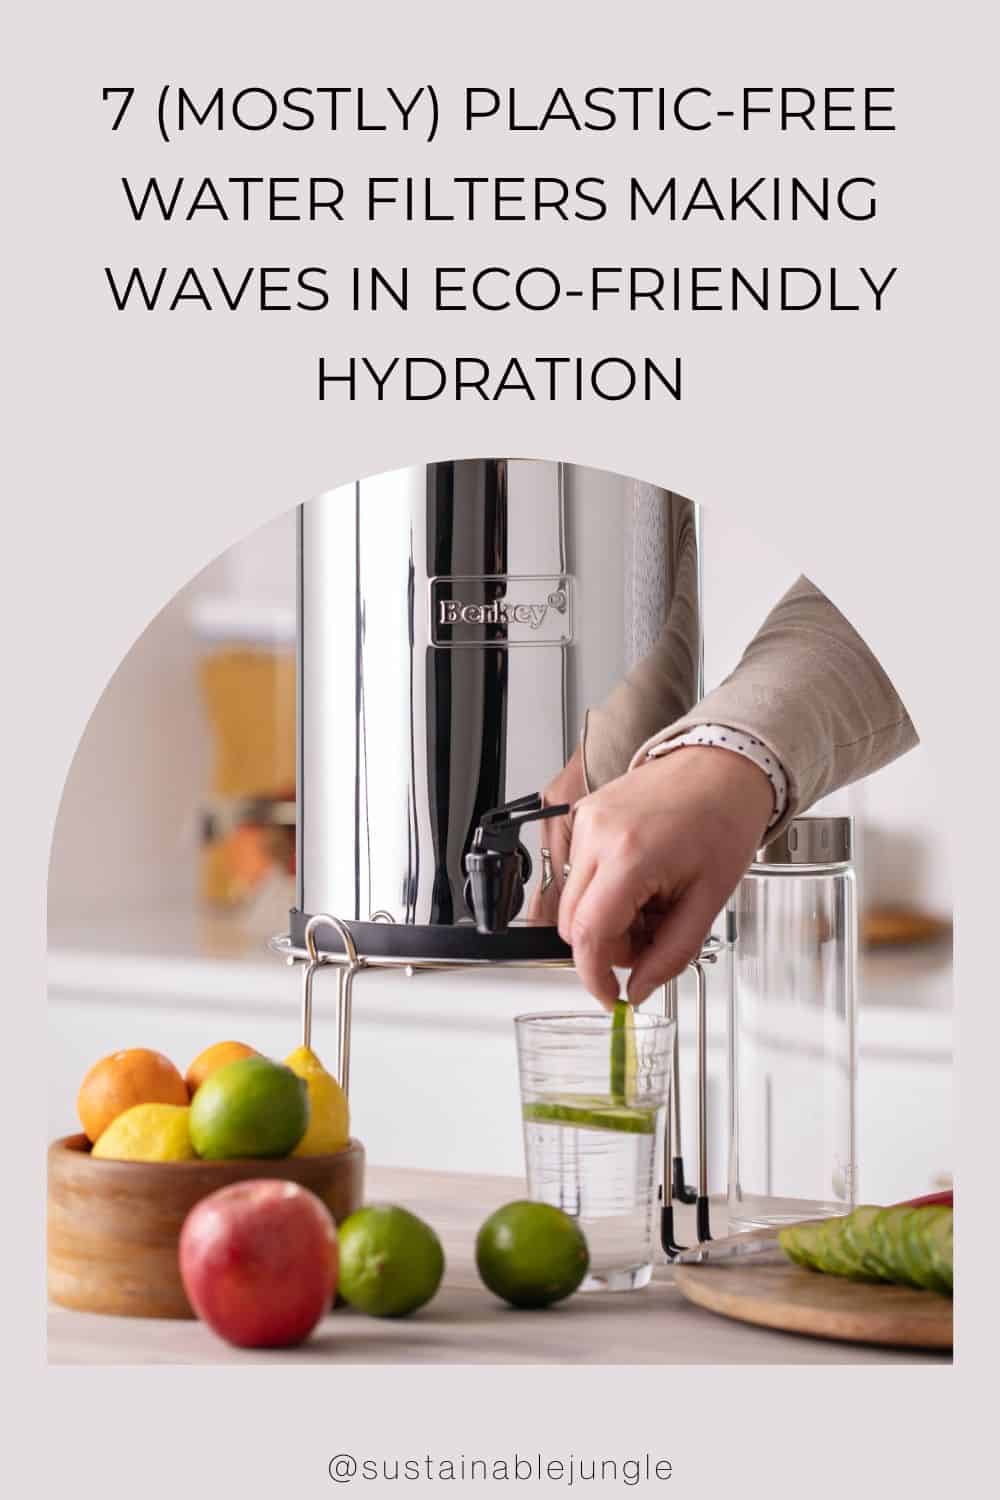 7 (Mostly) Plastic-Free Water Filters Making Waves In Eco-Friendly Hydration Image by Berkey #plasticfreewaterfilter #bestplasticfreewaterfilters #nonplasticwaterfilters #bestnonplasticwaterfilter #waterfilterwithoutplastic #sustainablejungle